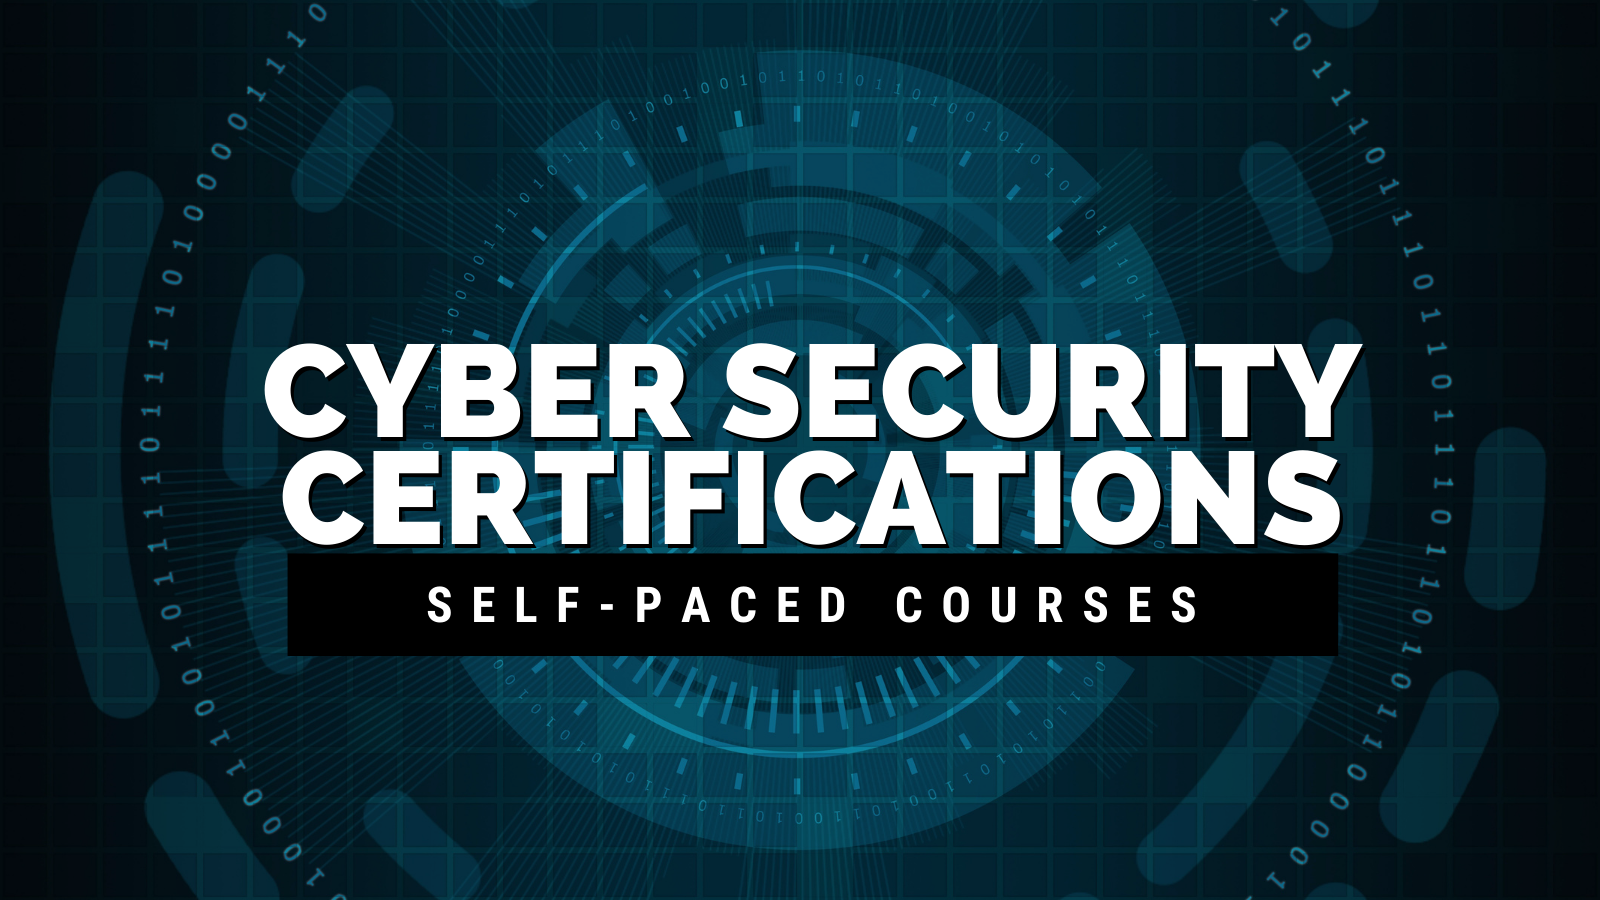 Cyber Security Certification Self Paced Courses Savannah Technical